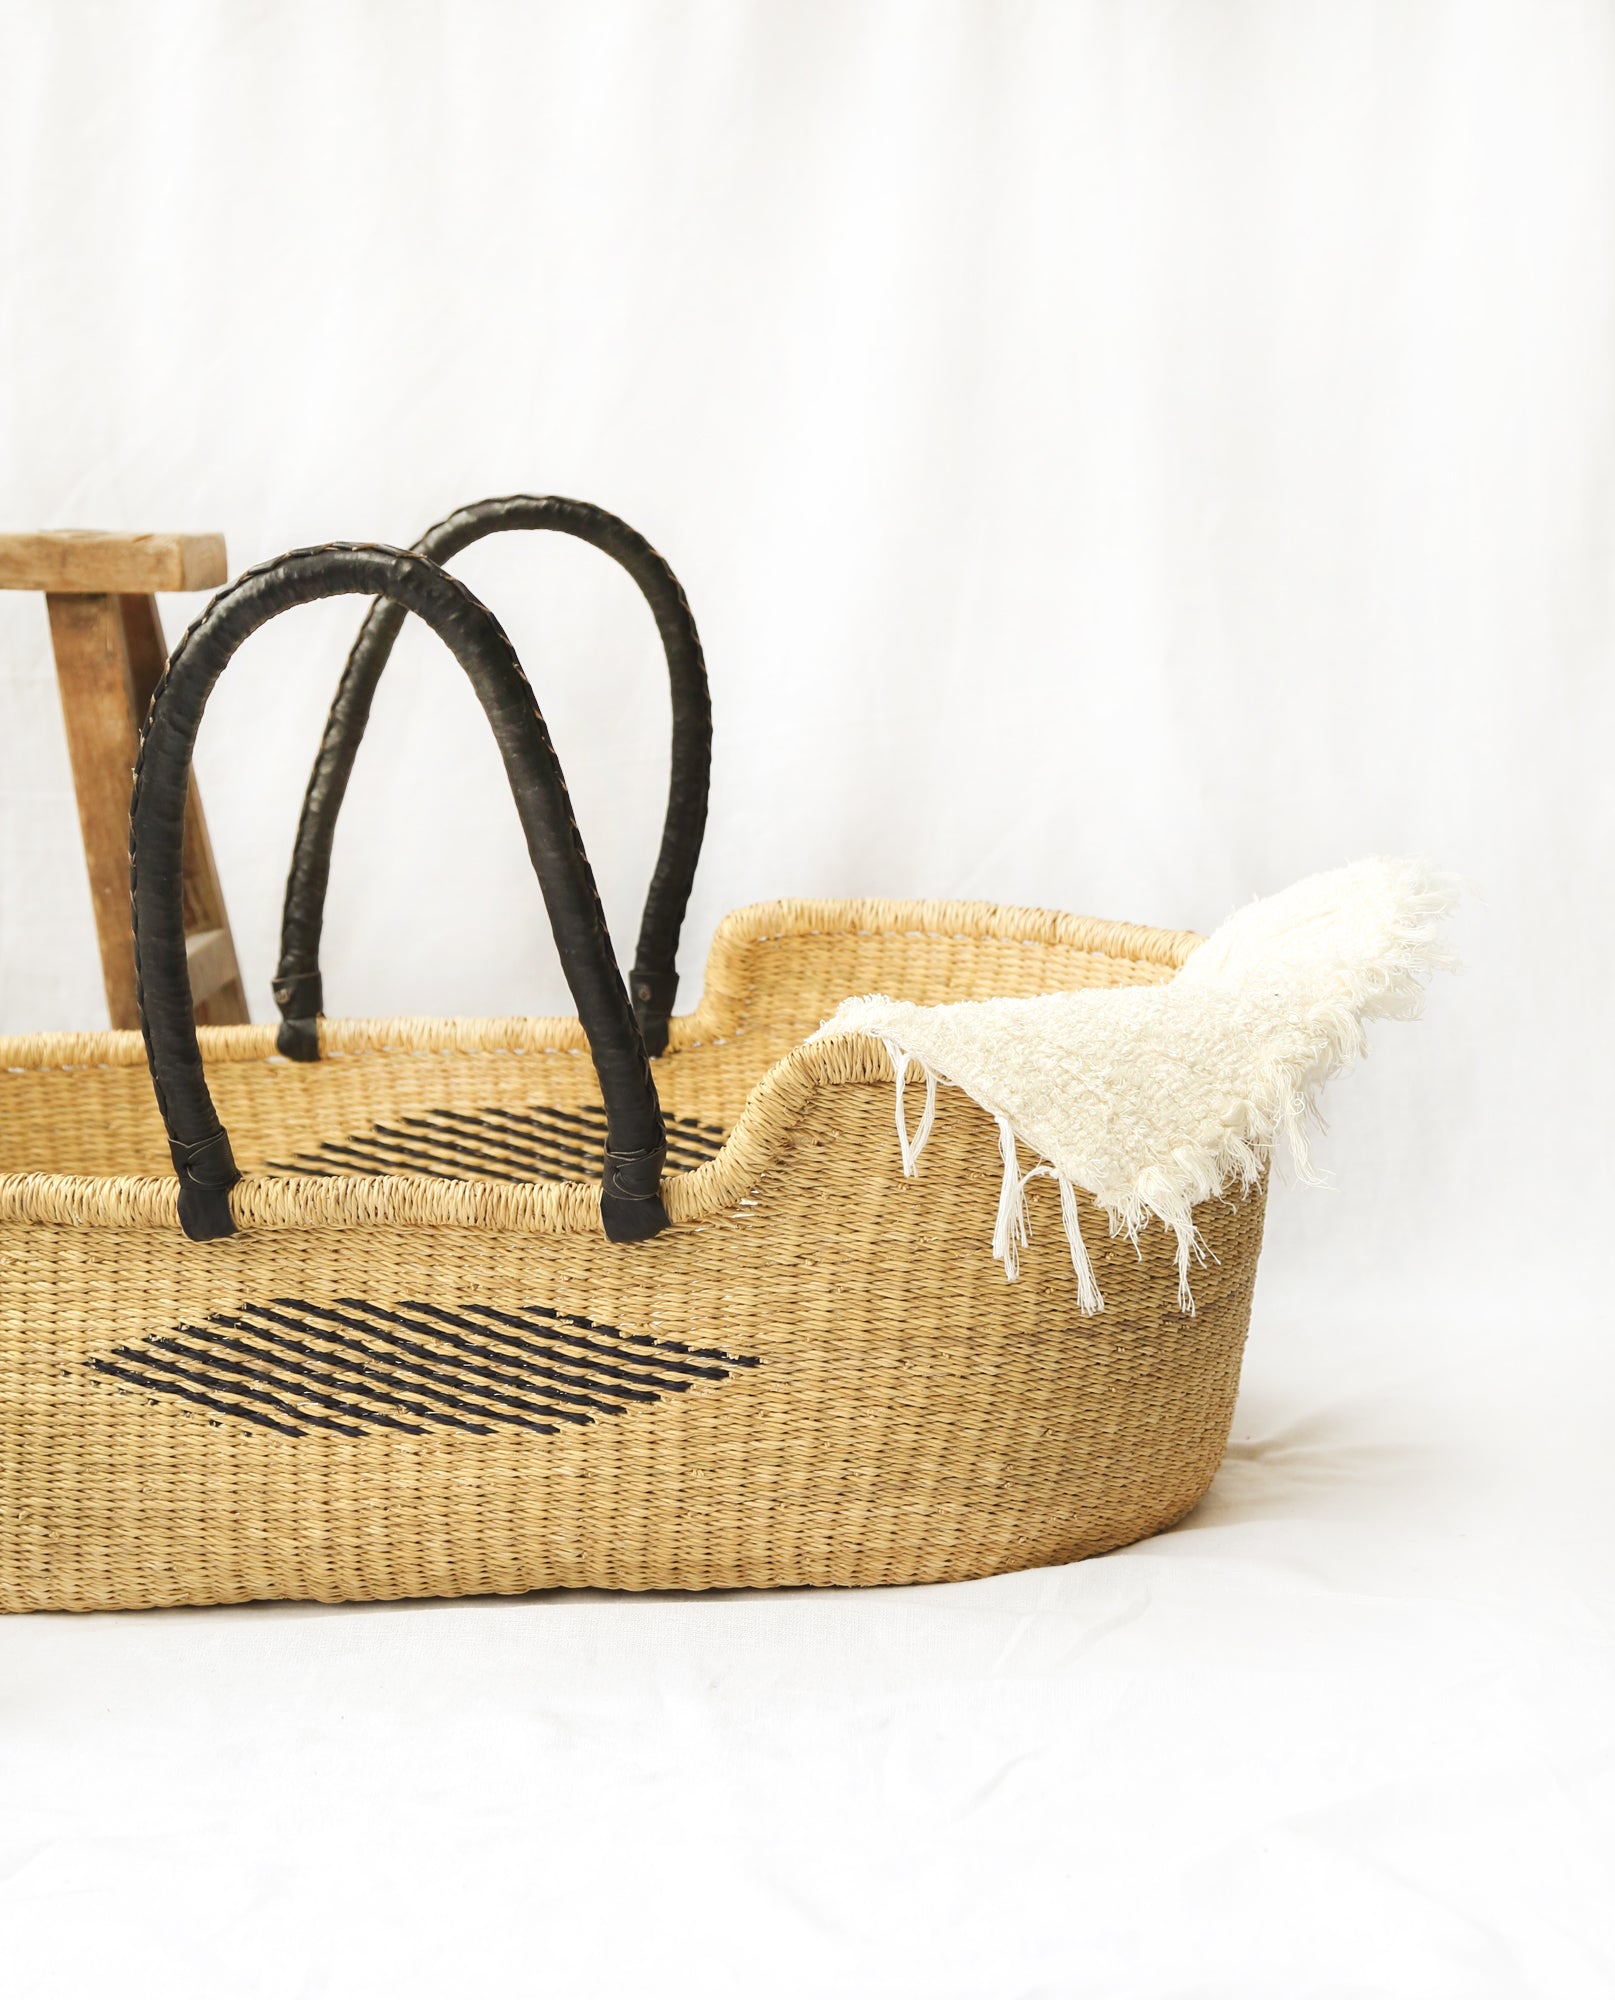 MALIKAH Handwoven Moses Basket With Leather Handles